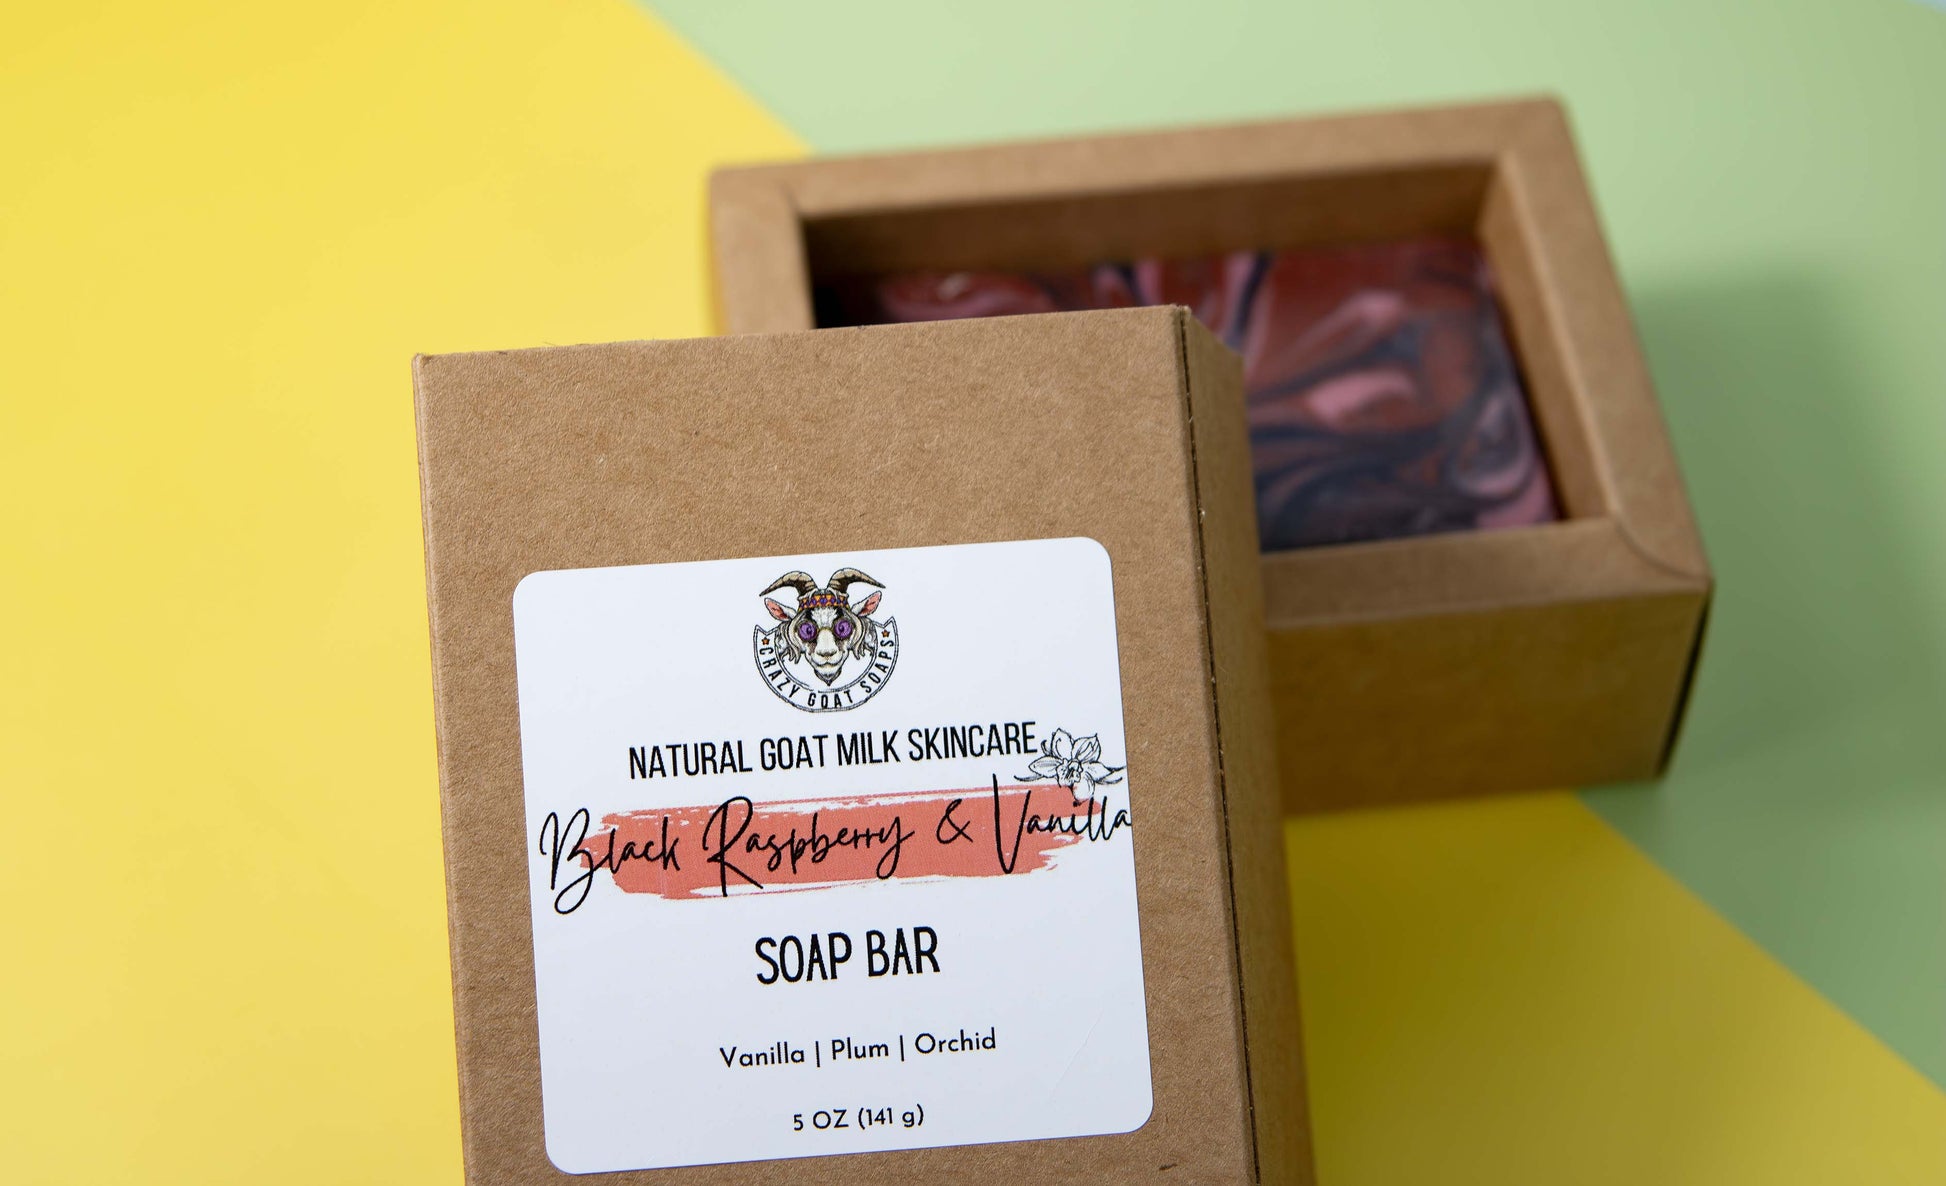 Crazy Goat Soaps Black Raspberry Vanilla Soap Bar comes in a box and fully labled. 